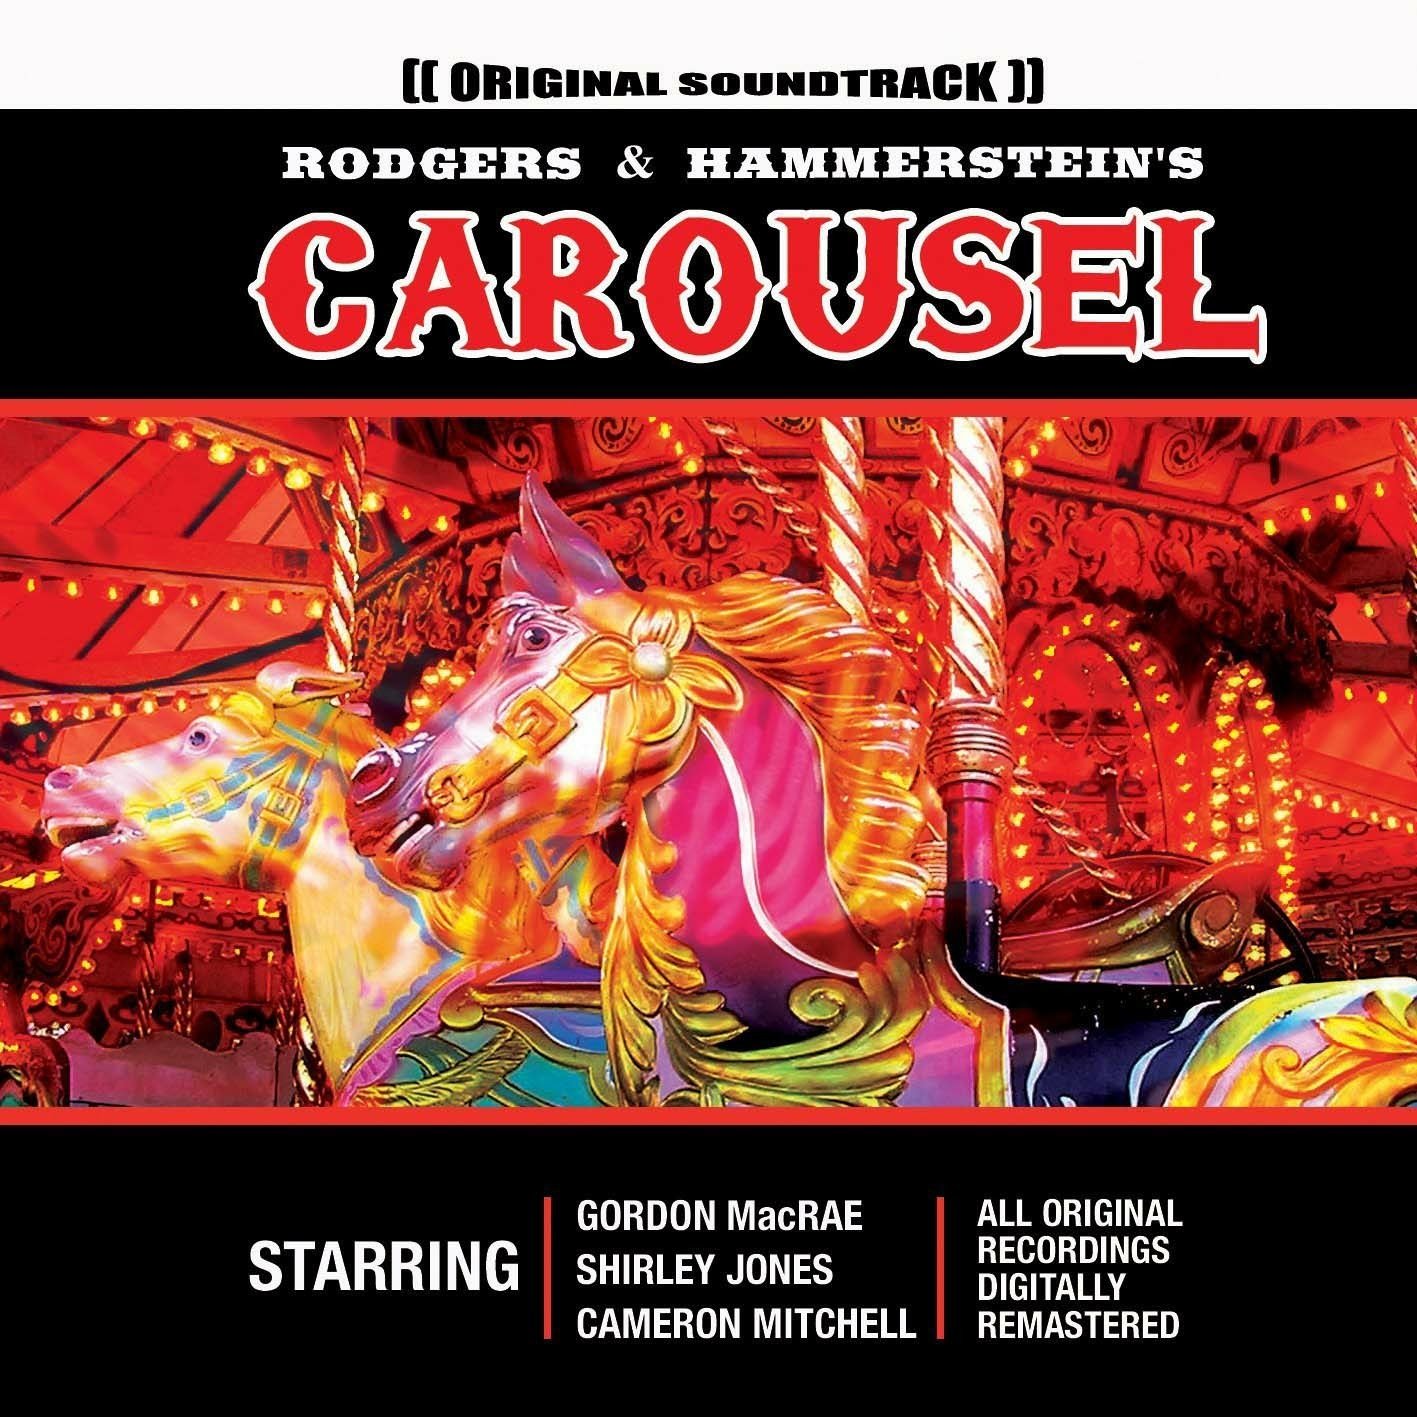 CD Shop - RODGERS & HAMMERSTEIN CAROUSEL